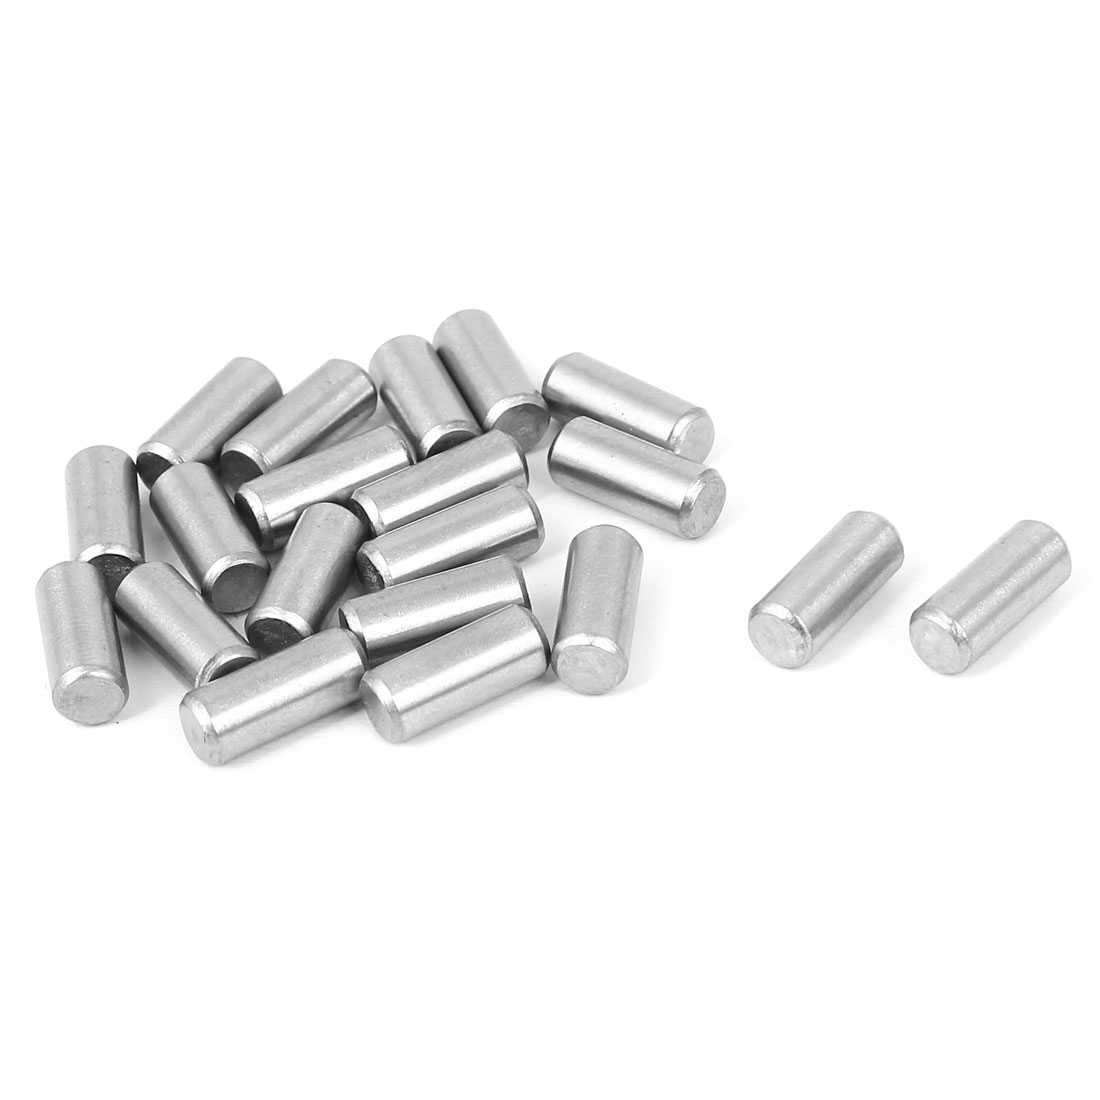 M5x12mm Stainless Steel Parallel Dowel Pins Fastener Elements 20pcs